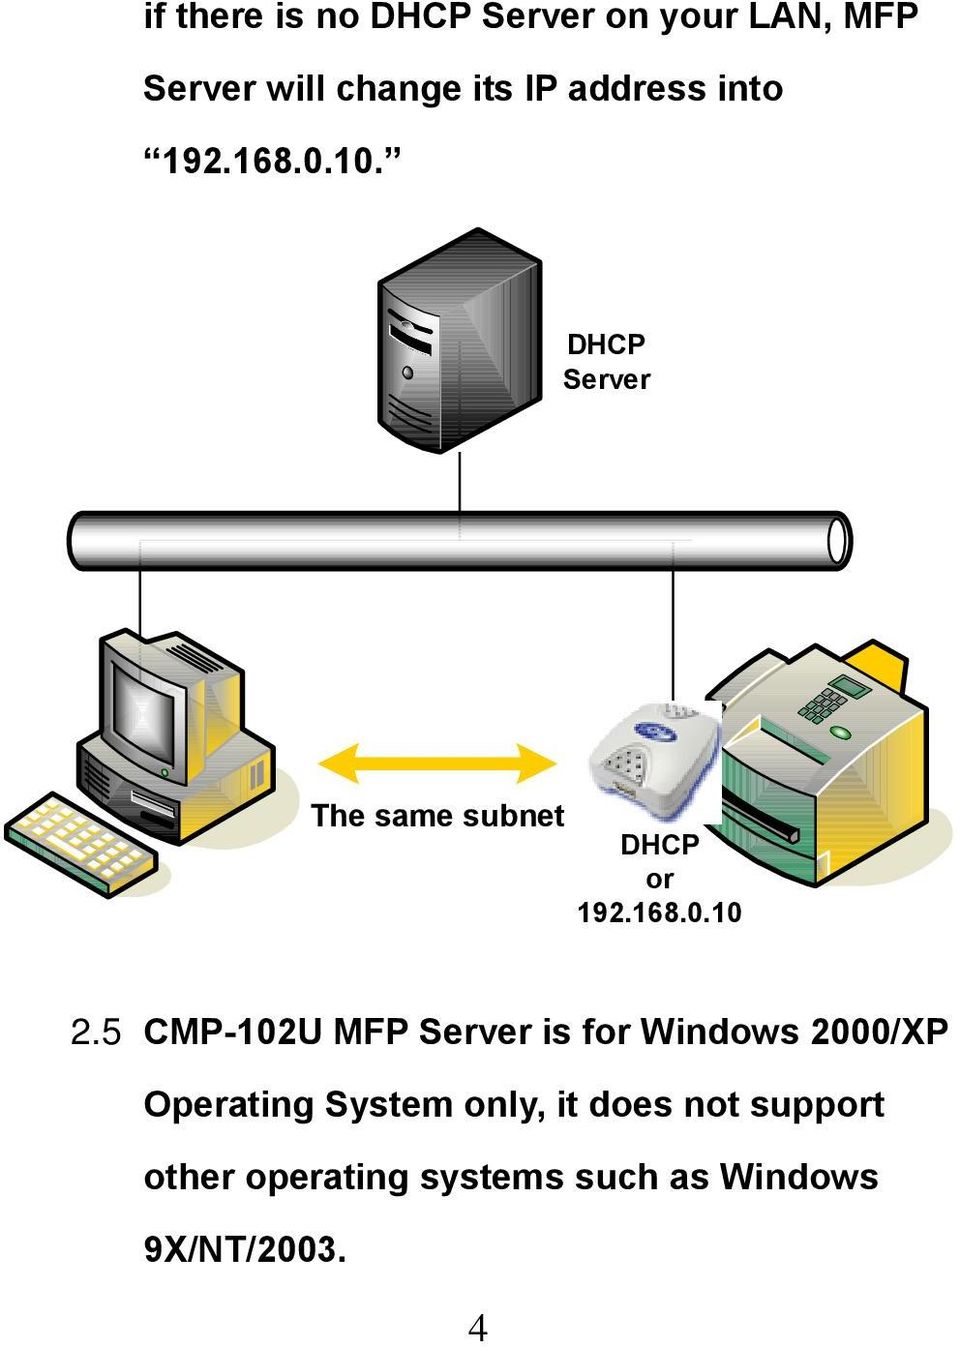 5 CMP-102U MFP Server is for Windows 2000/XP Operating System only, it